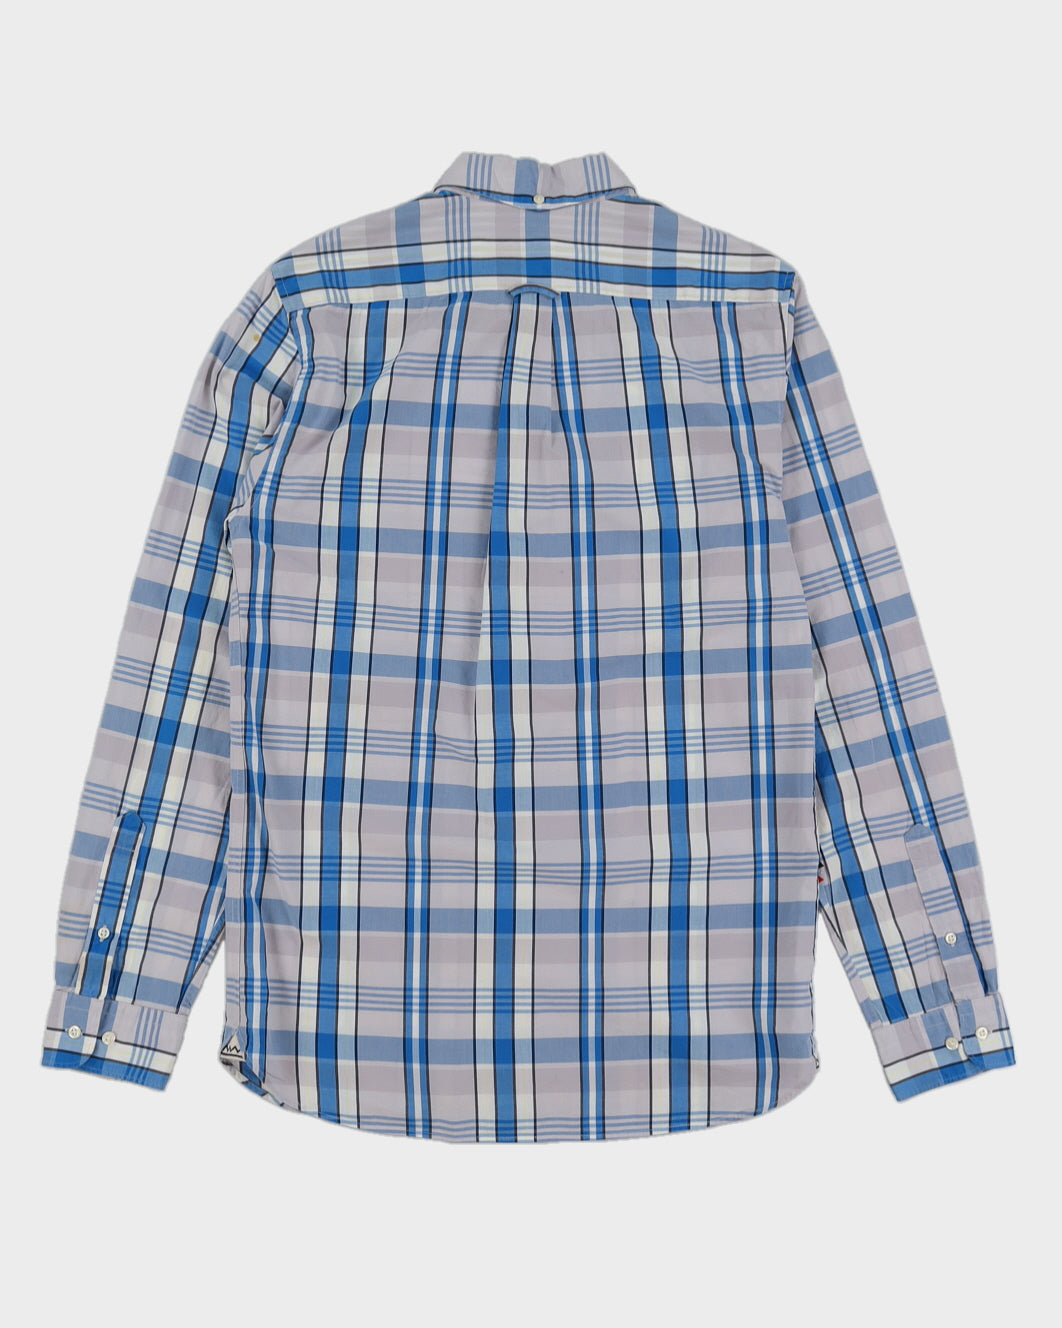 Lacoste Live Blue Checked Long Sleeved Shirt - S